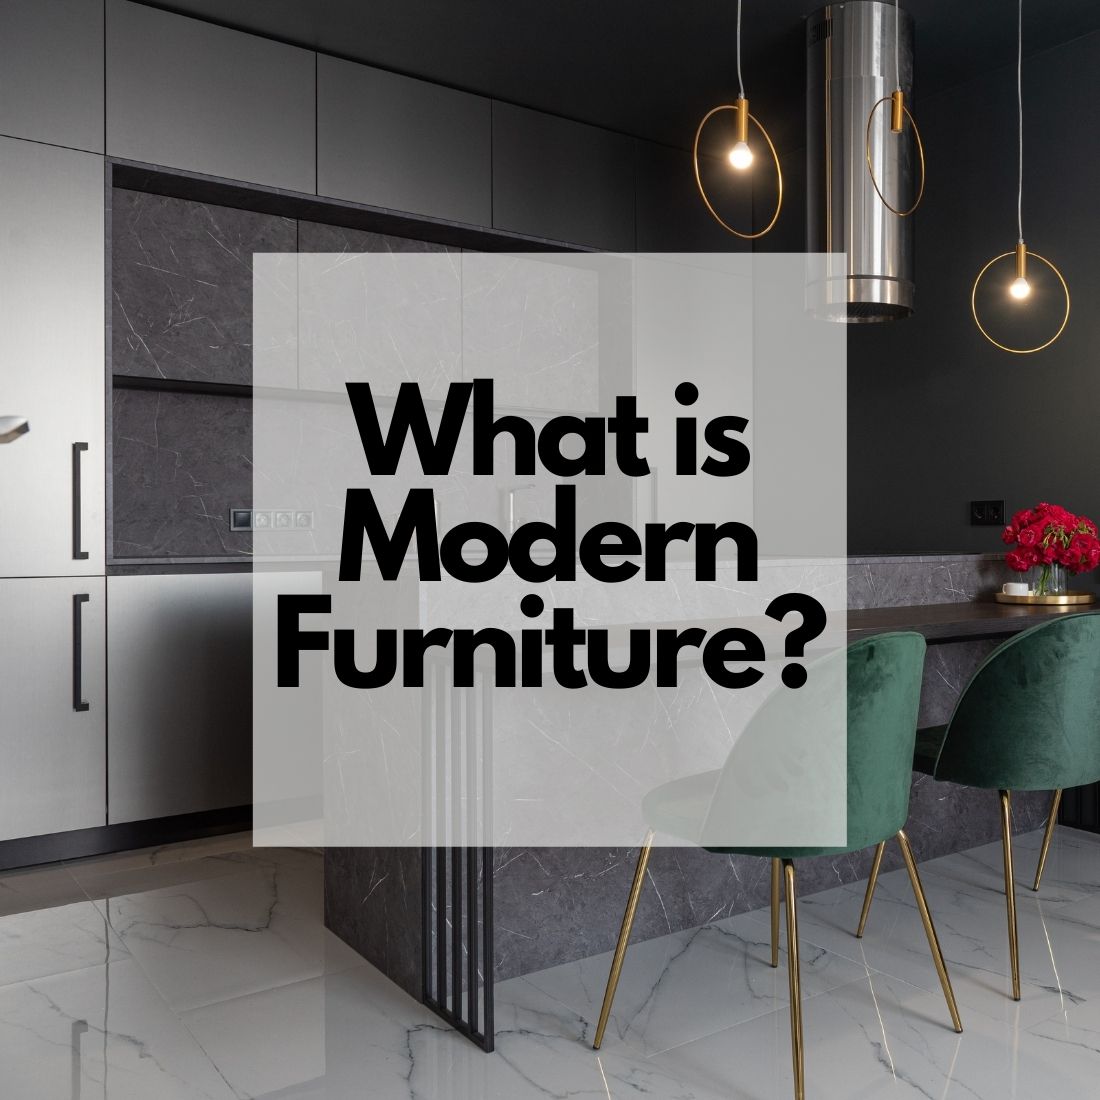 What is Modern Furniture?